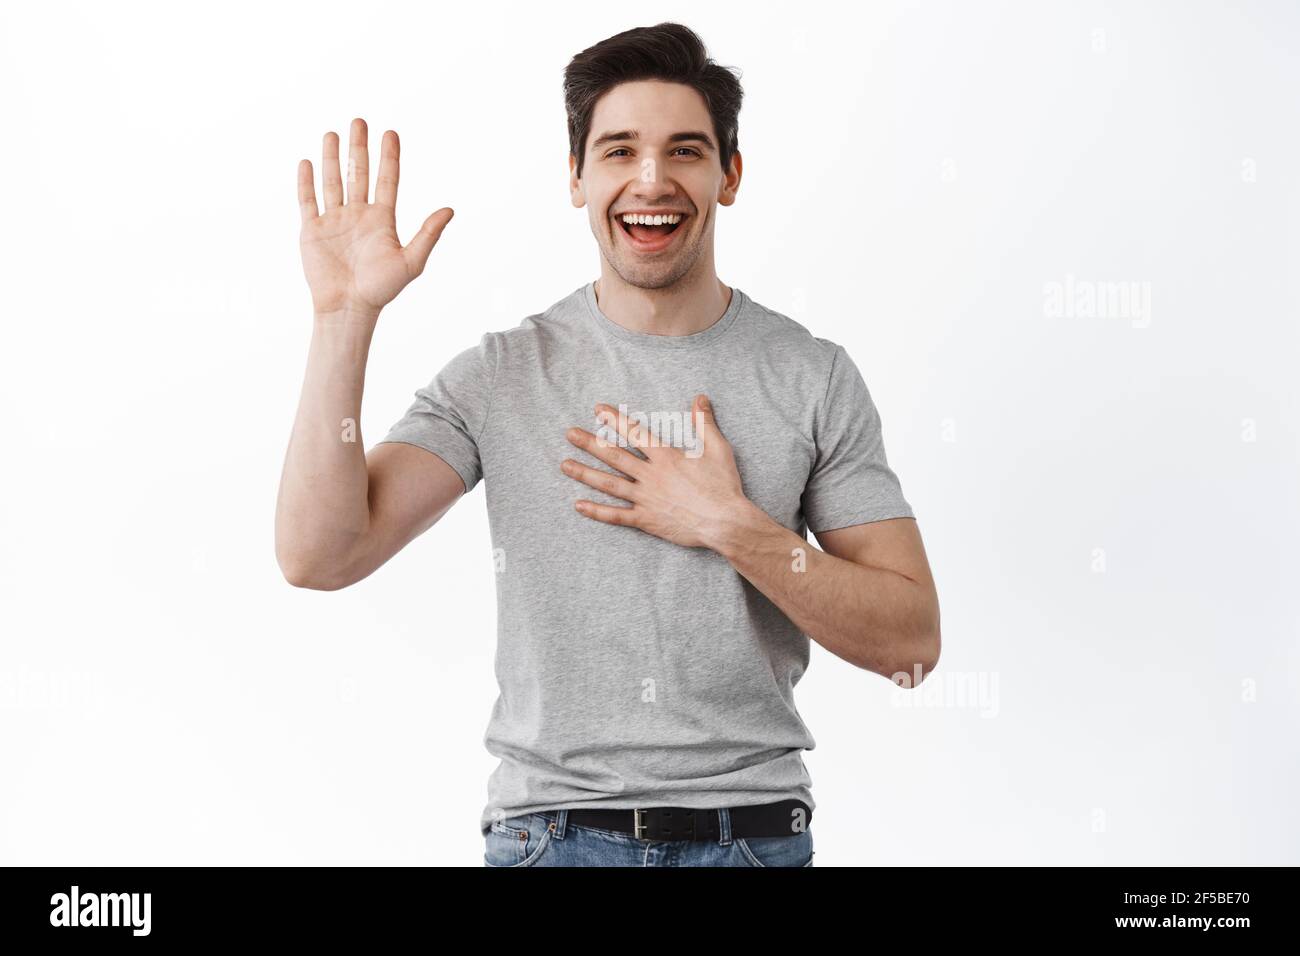 Happy smiling adult man introduce himself, raising hand and hold palm on chest, swearing, making an oath or promise, standing cheerful against white Stock Photo